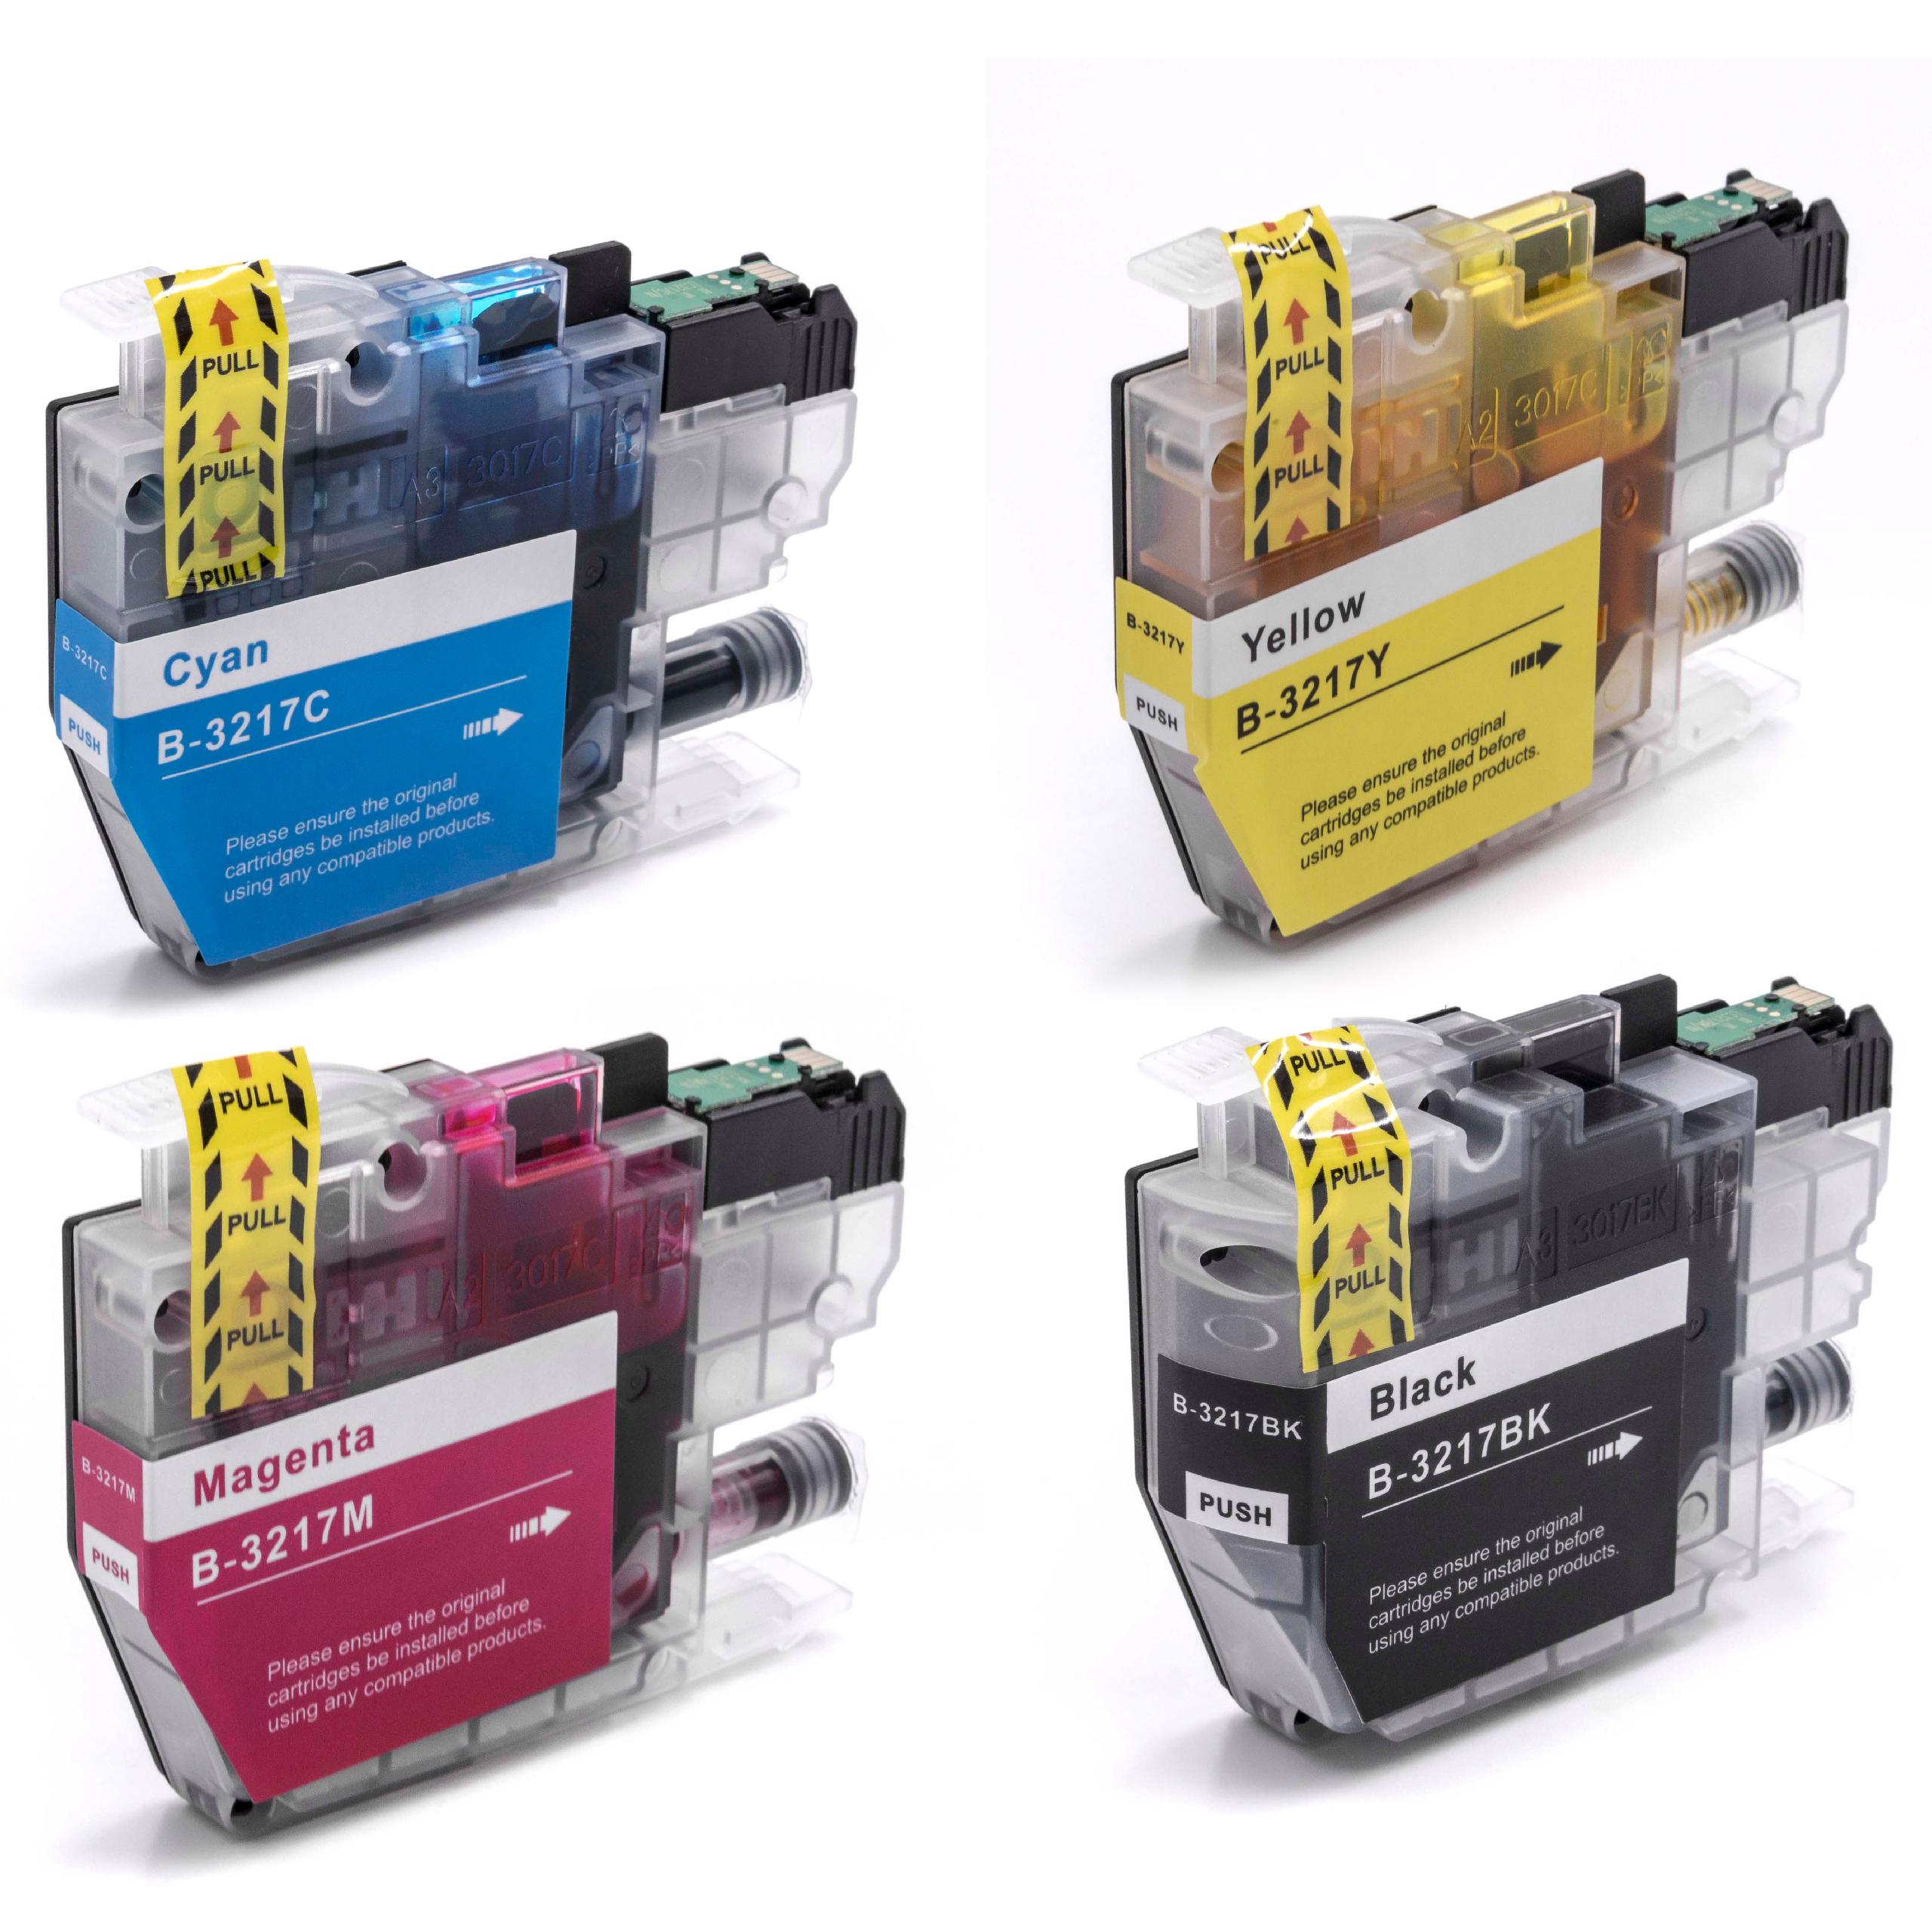 4x Ink Cartridges replaces Brother LC-3217BK, LC3217BK, LC3217C for MFC-J5330 Printer - Multi-Coloured